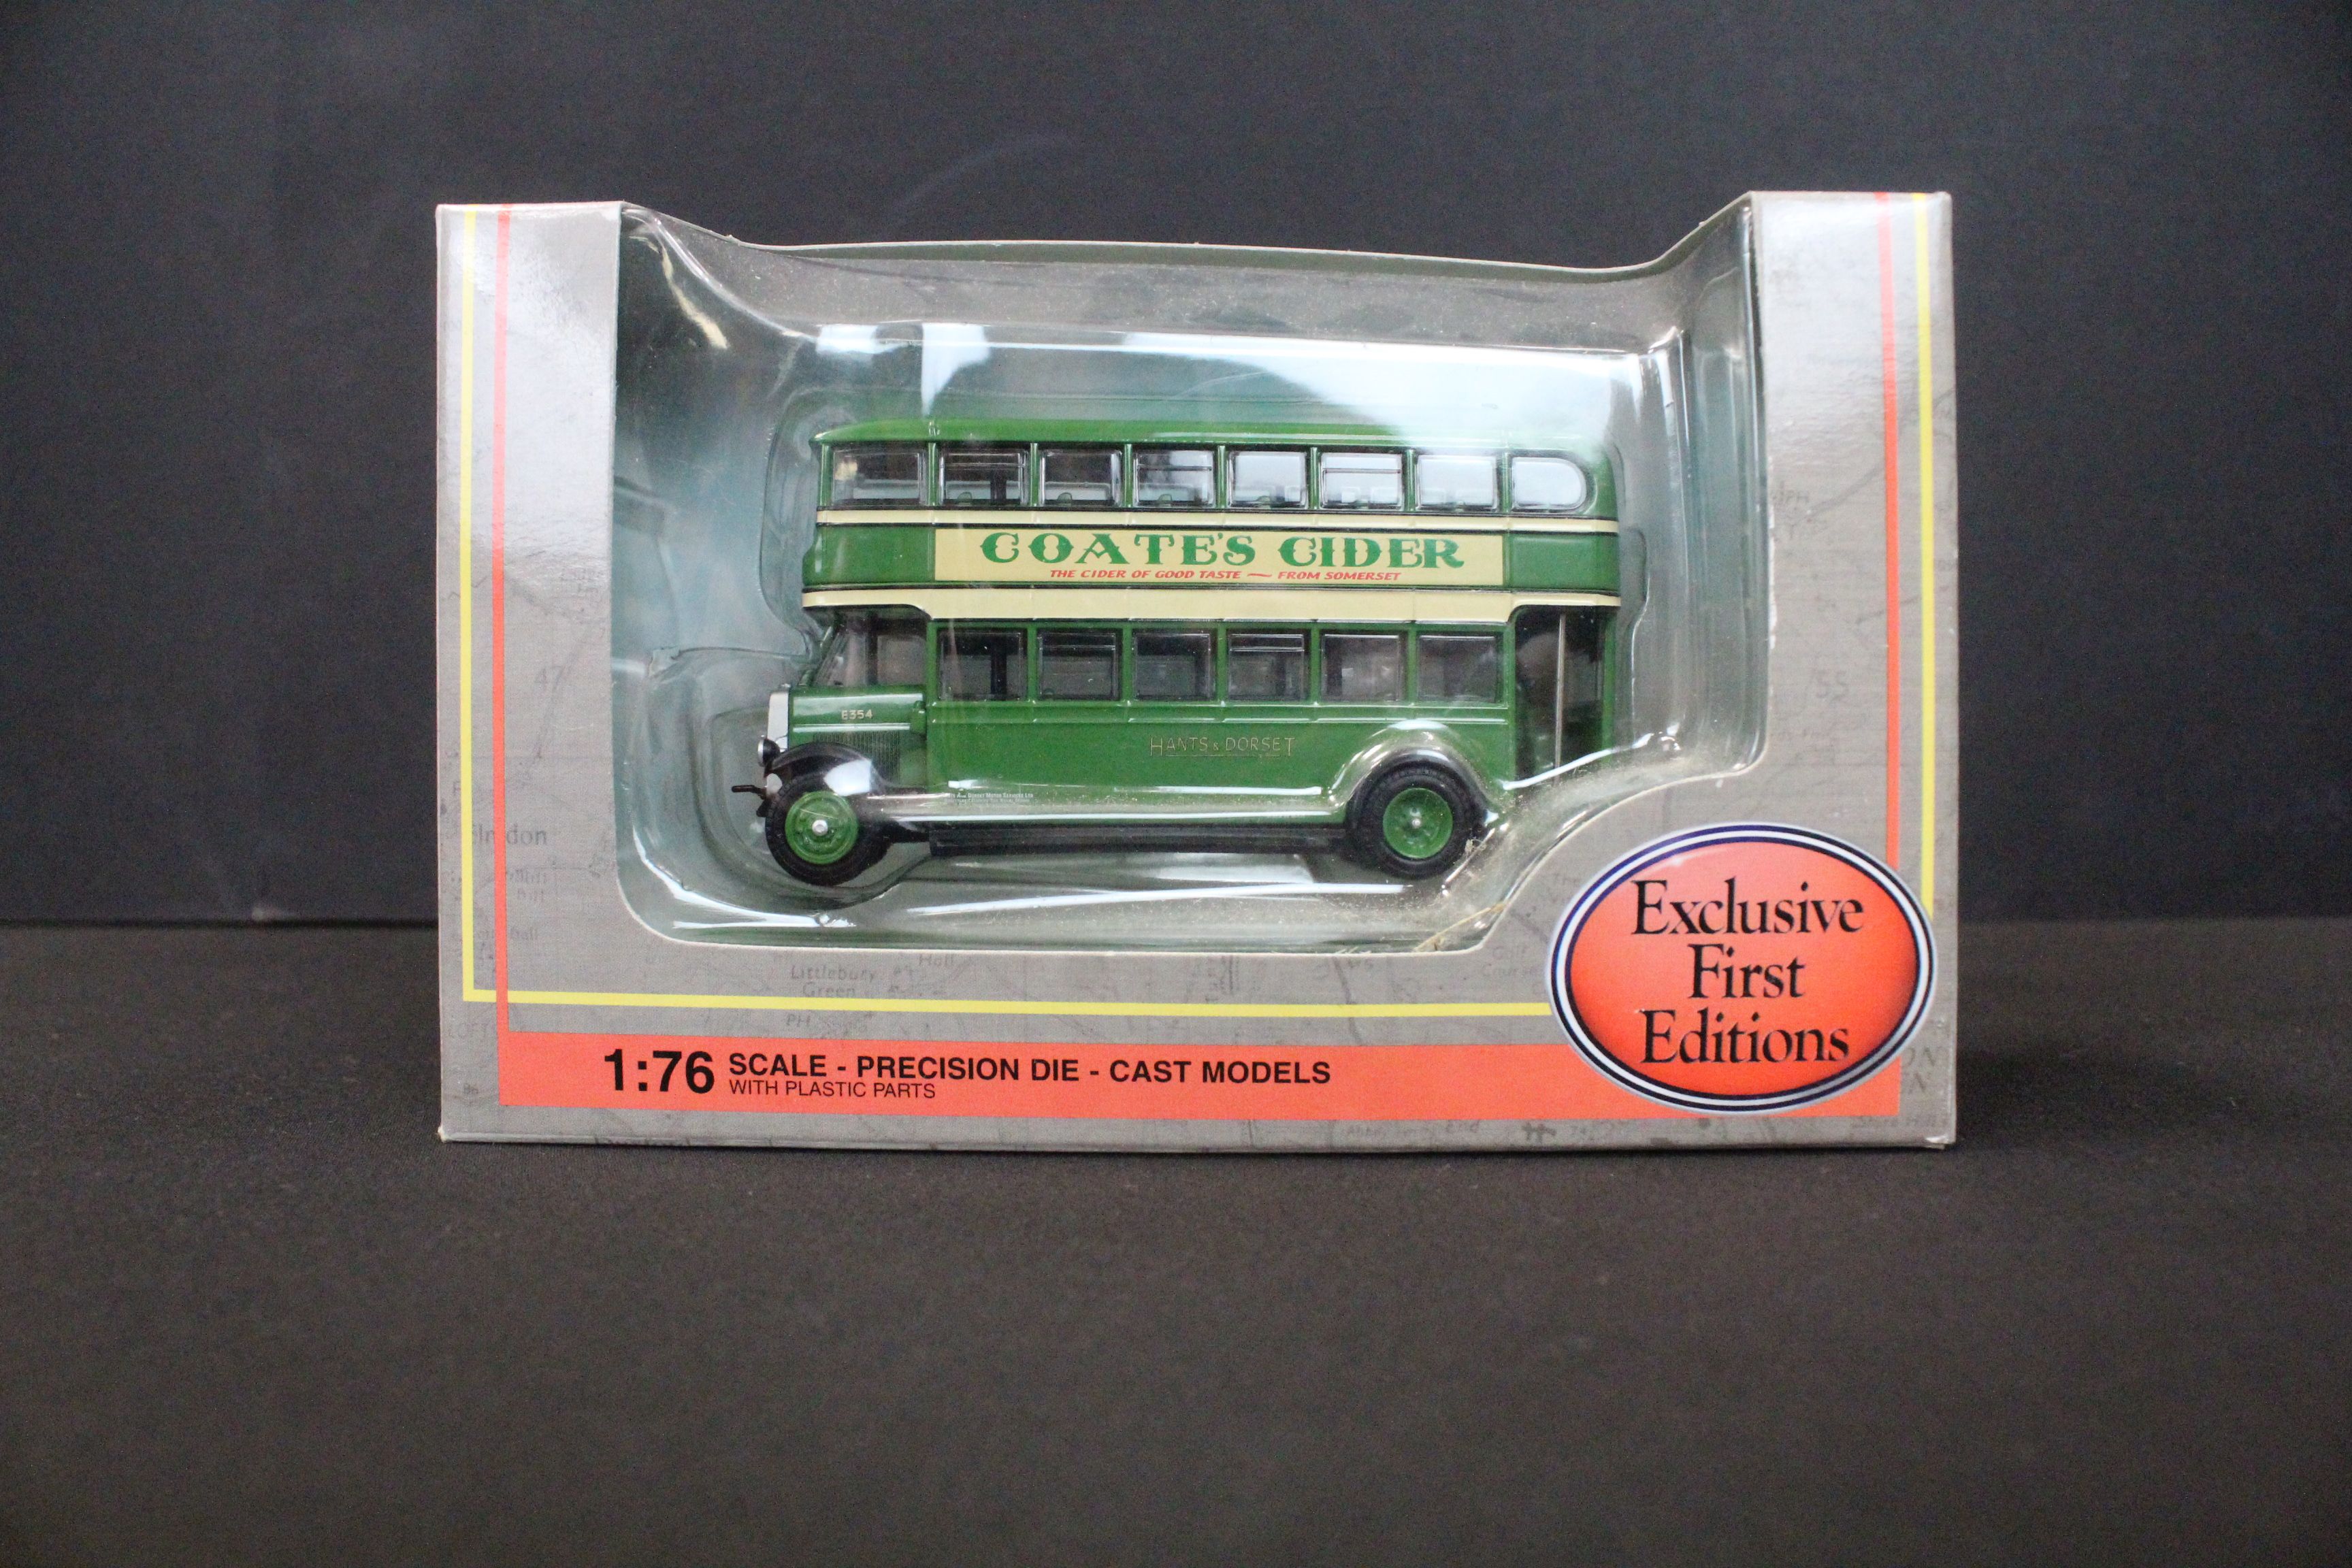 29 Boxed EFE Exclusive First Editions diecast model buses, diecast ex, boxes gd to vg overall - Image 8 of 8